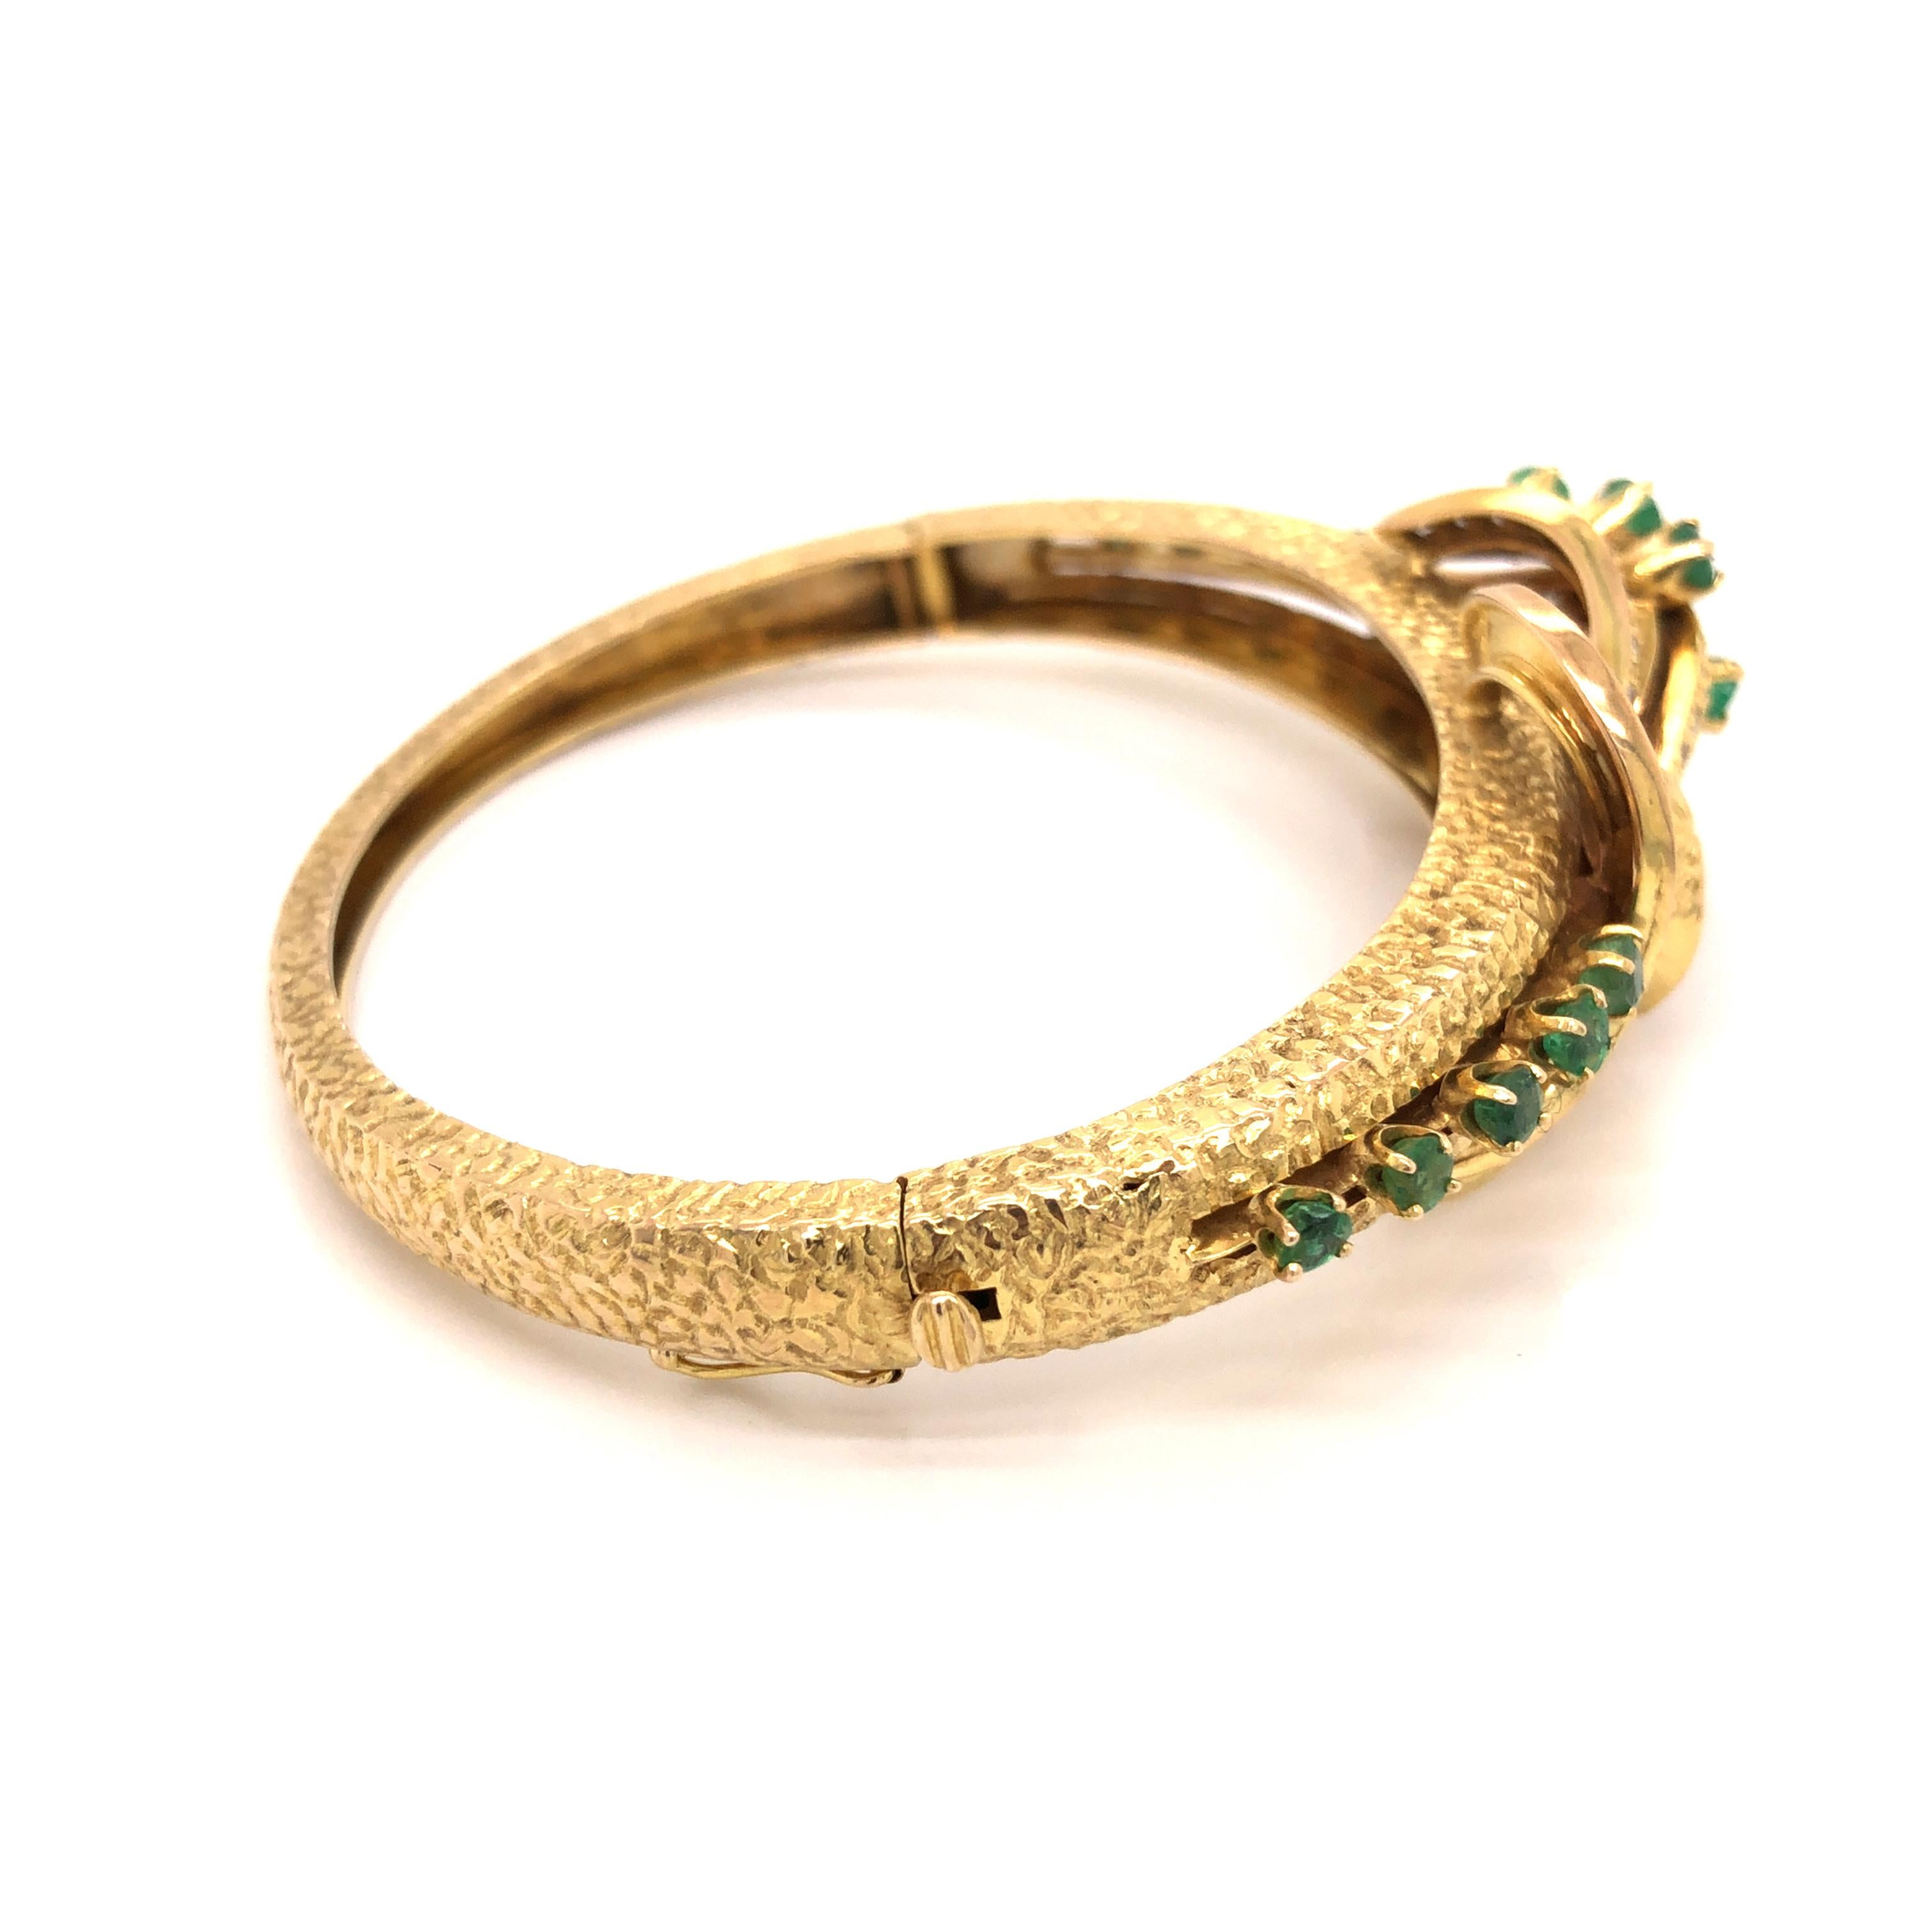 14K yellow gold hinged bangle containing an elaborate chased coiling ribbon and raised swirls set with 16 round emeralds weighing a total of approximately 1.05 carats and 30 round-cut diamonds weighing a total of approximately .35 carat,H-I color,SI